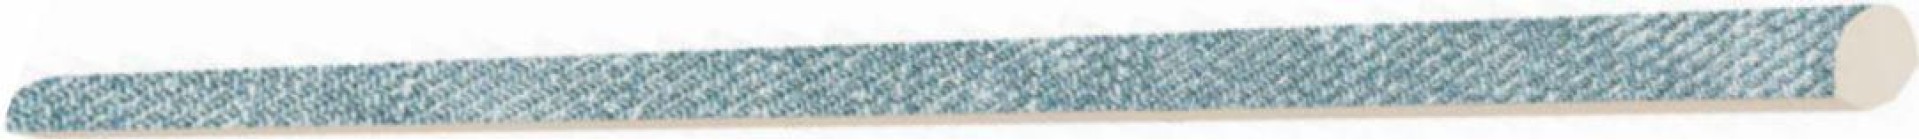 Спецэлемент Denim Rounded Edge Washed Blue 0.8x13.8 (WOW)